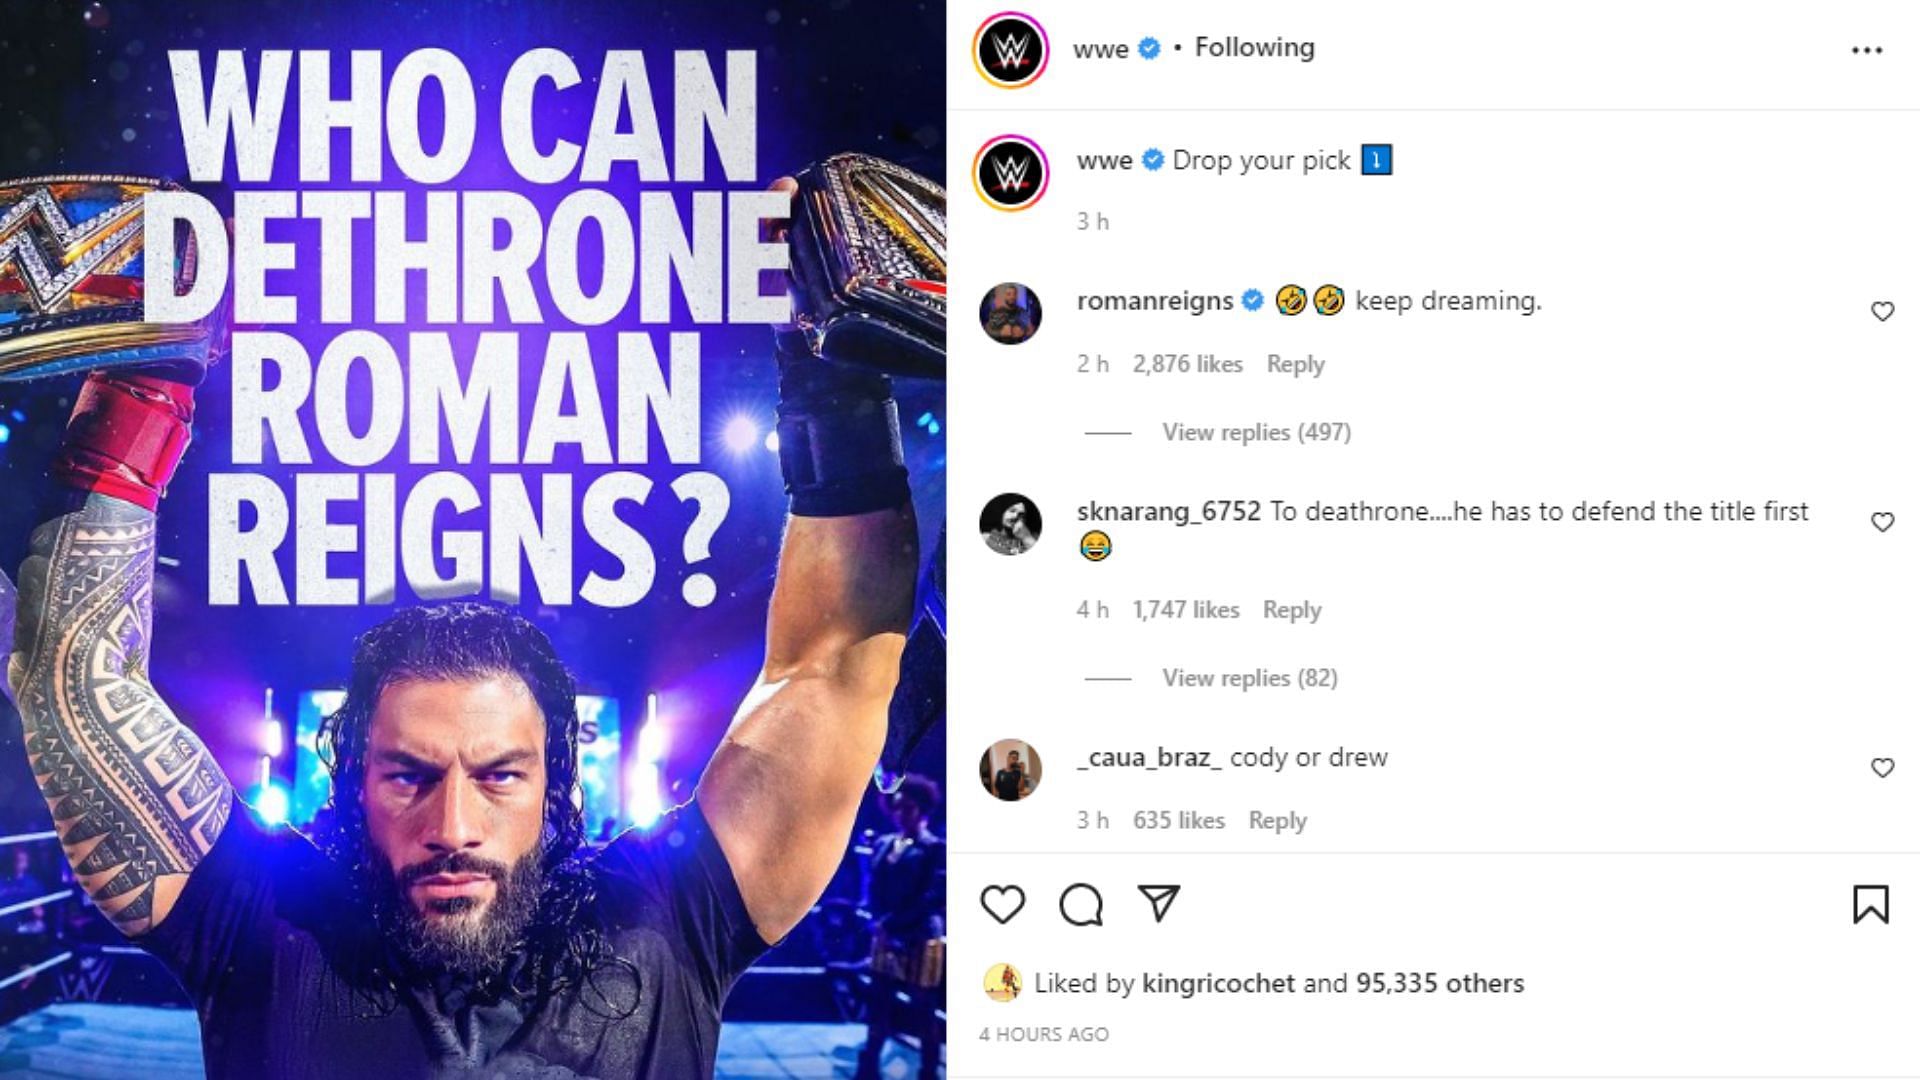 WWE received a response from Roman Reigns himself.